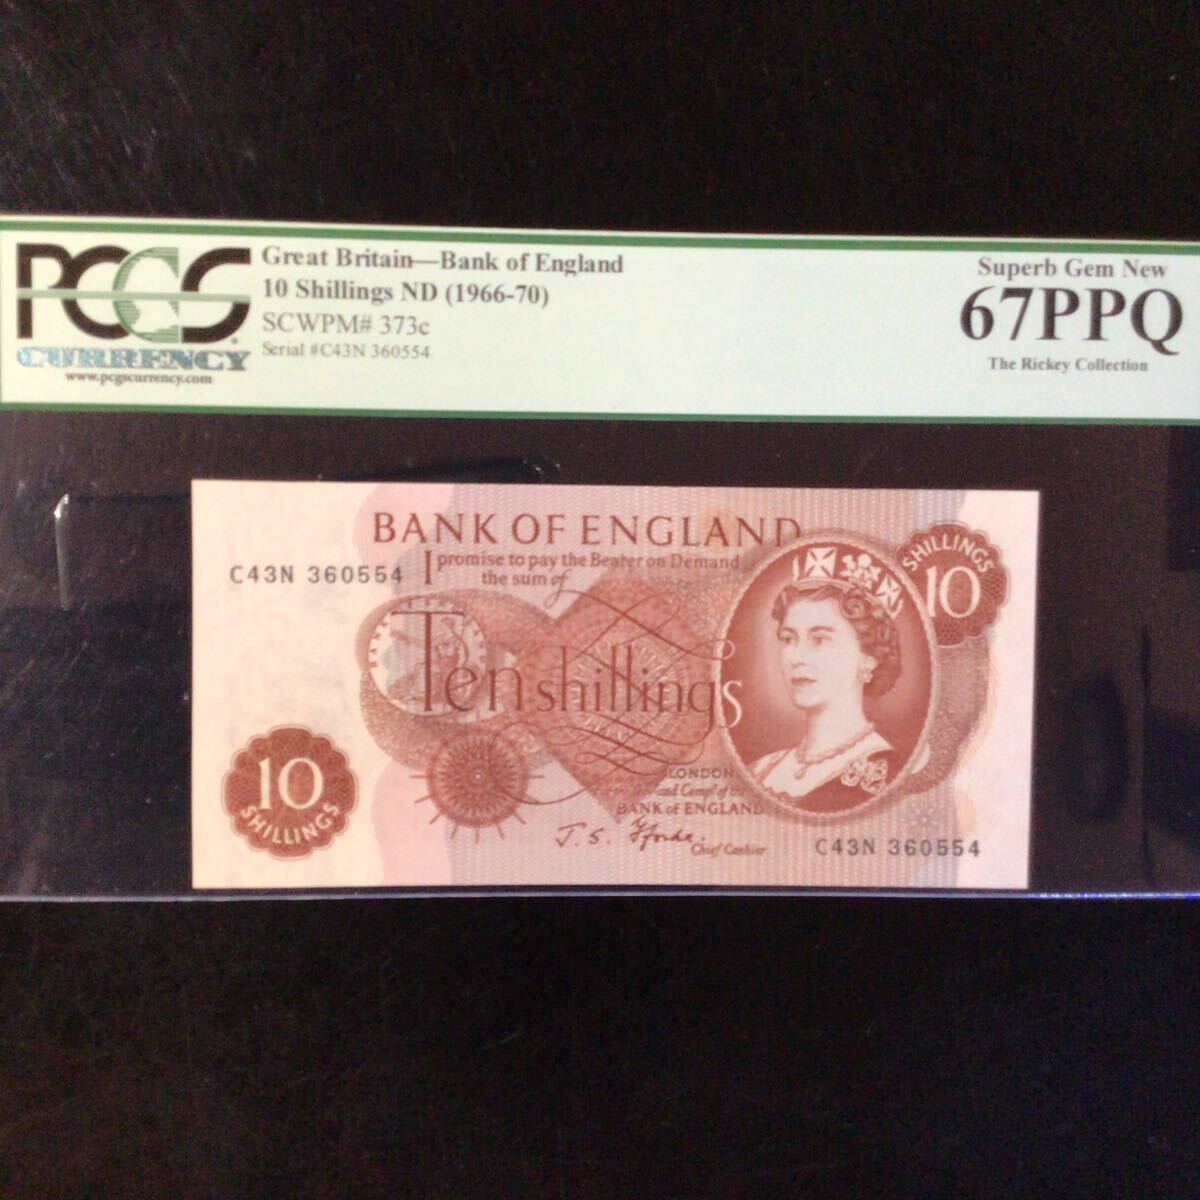 World Banknote Grading GREAT BRITAIN《Bank of England》10 Shillings【1966-70】『PCGS Grading Superb Gem Uncirculated 67 PPQ』._画像1